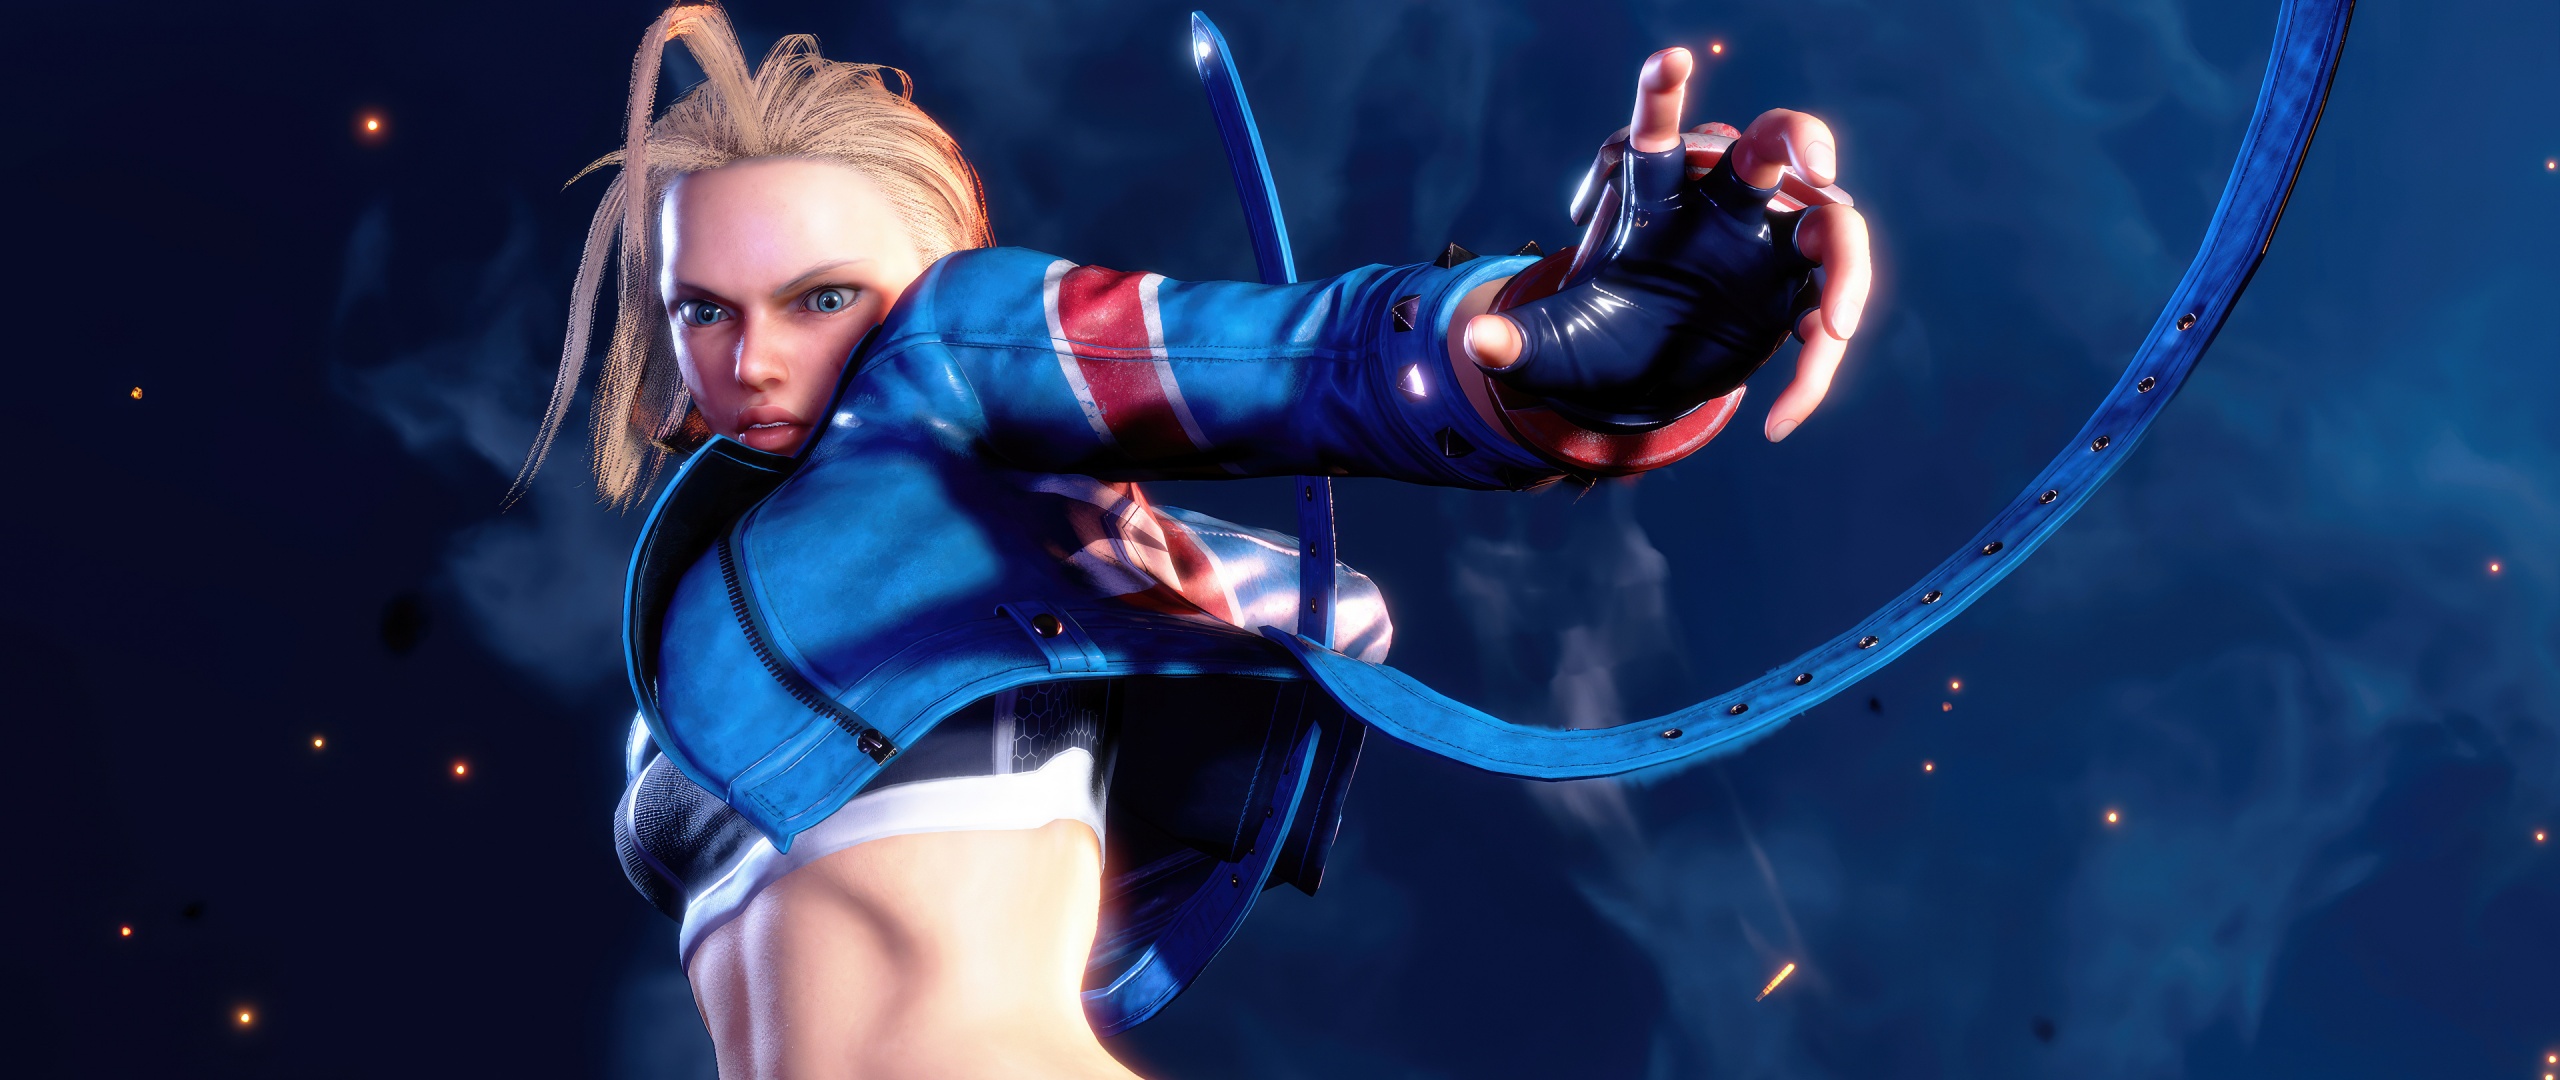 Cammy White Aesthetic Summer Wallpapers - HD Game Wallpapers